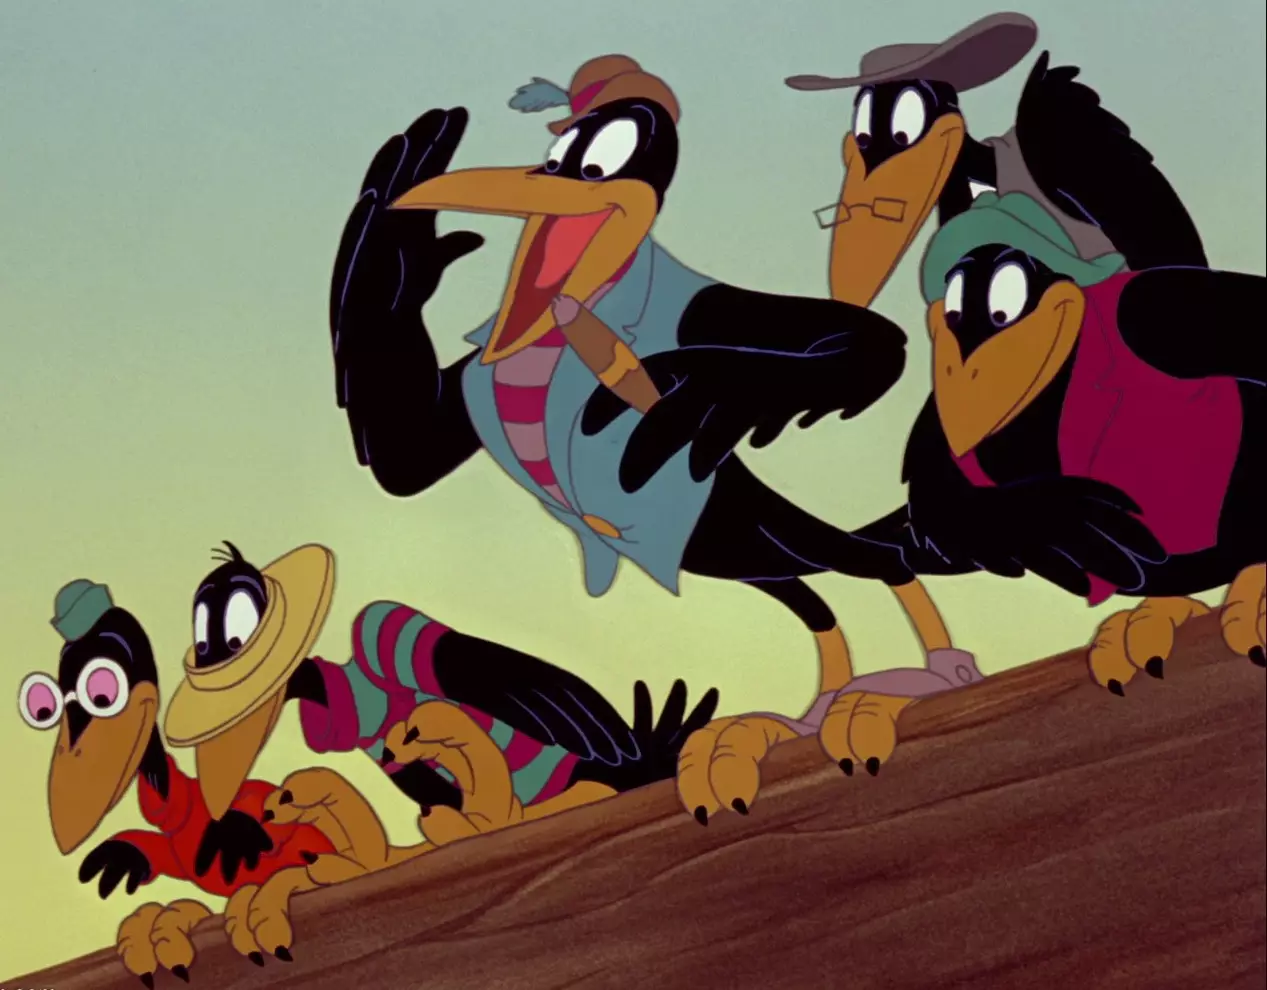 The crows from Dumbo which are representations of minstrel shows /